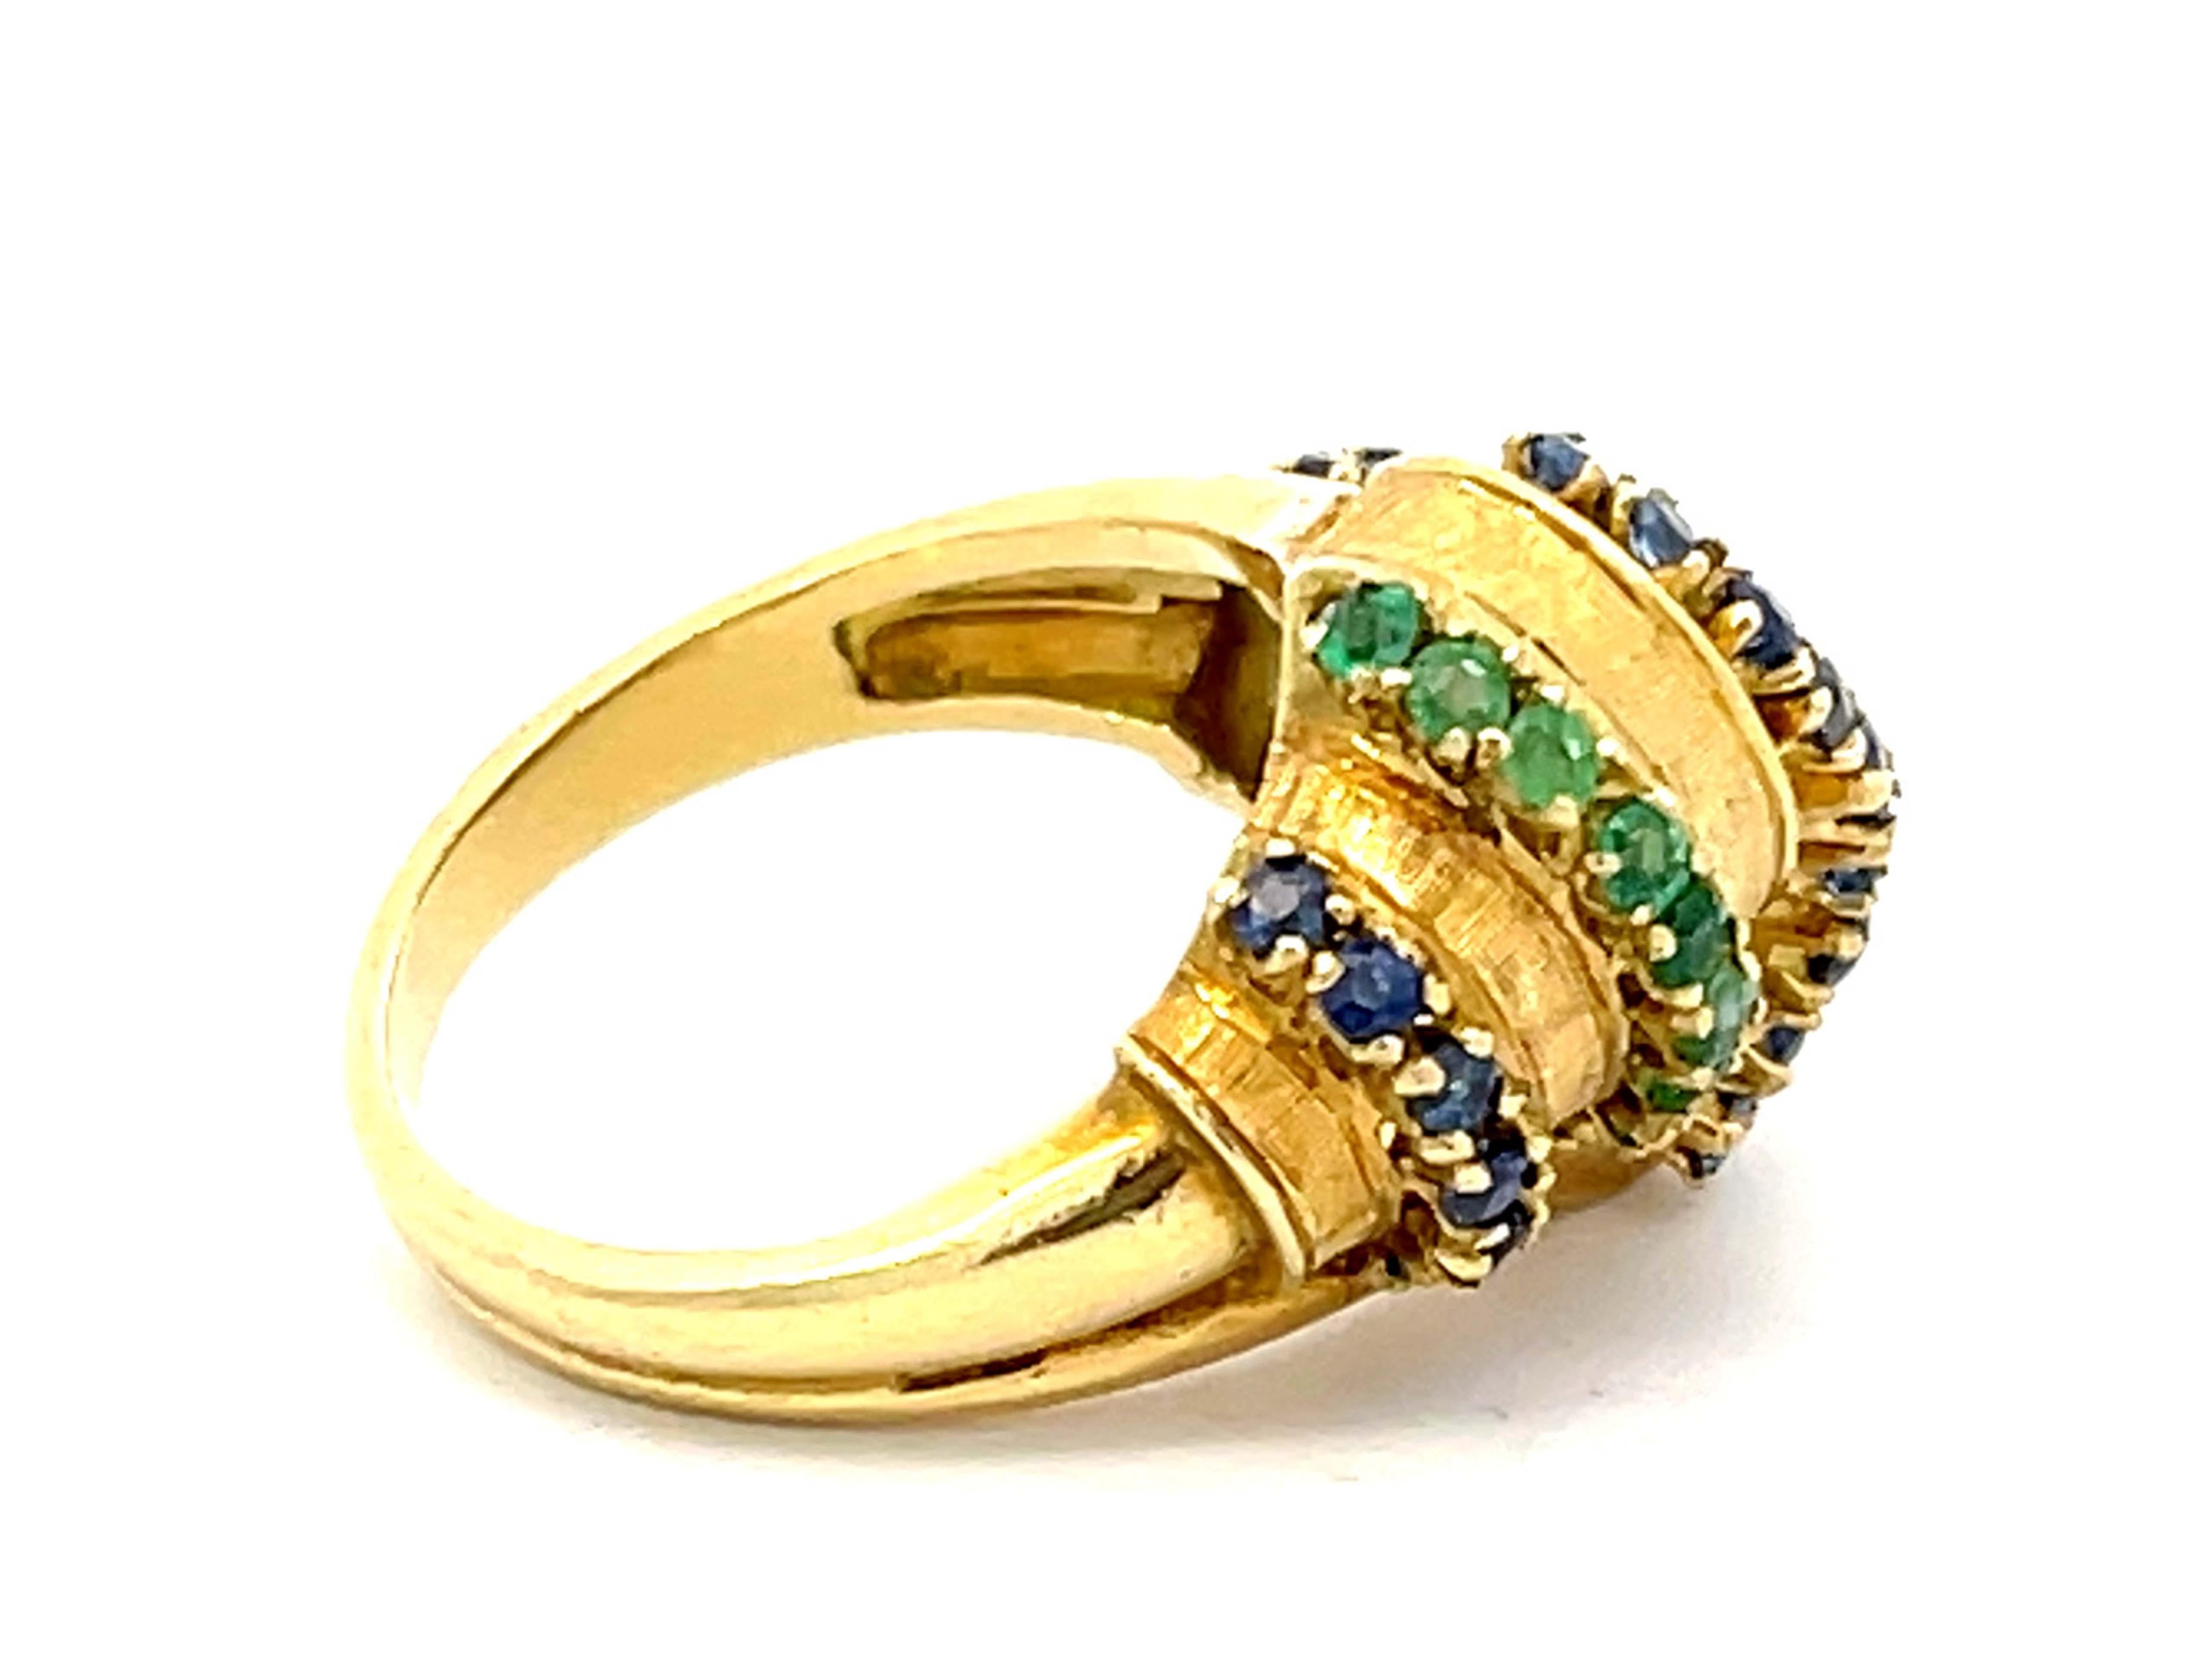 Alternating Sapphire and Emerald Rows Vintage Ring in 18k Yellow Gold In Excellent Condition For Sale In Honolulu, HI